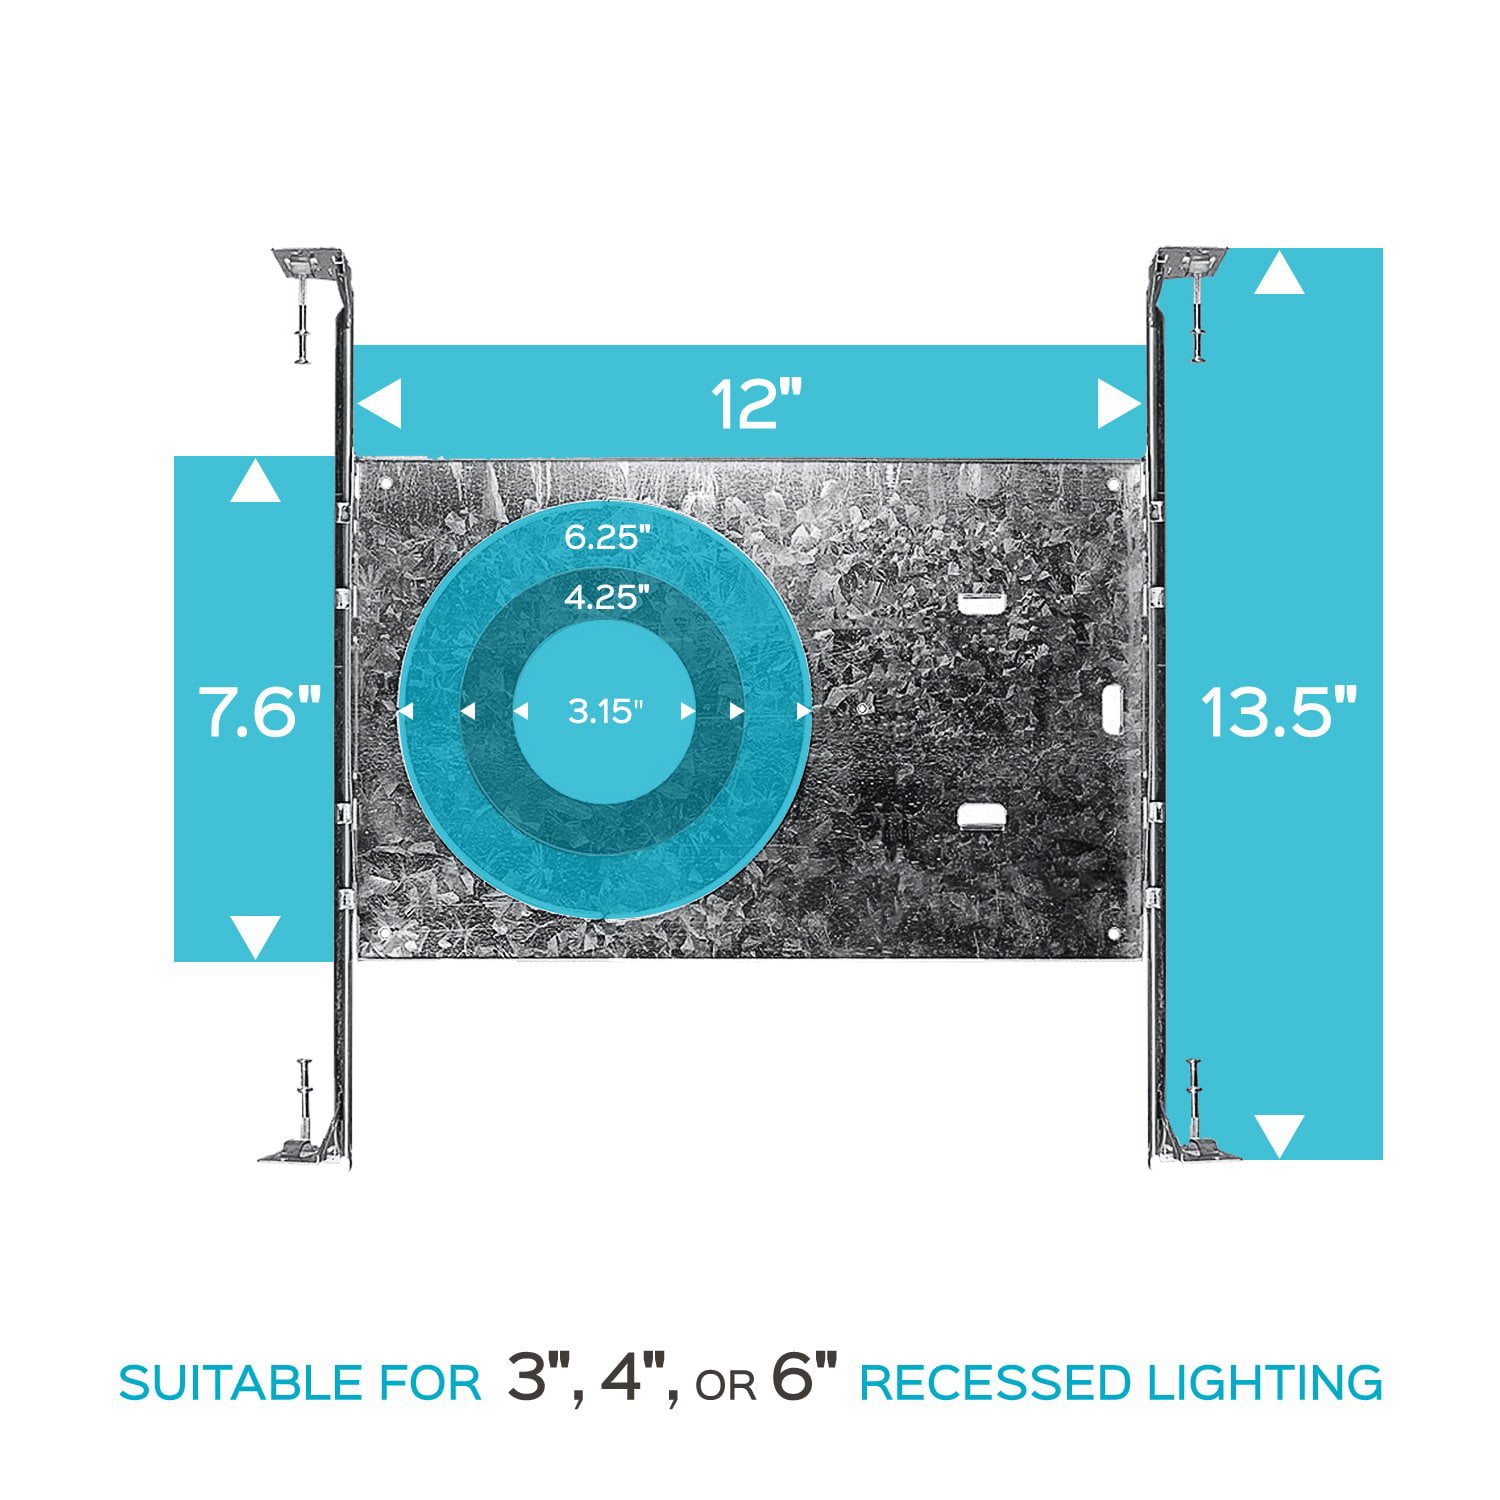 6 Pack Shallow Recessed Light Housing Luxrite New Construction Mounting Plate Extendable Hanger Bars ETL Listed 3-4-6 Inch LED Recessed Lighting Kits 